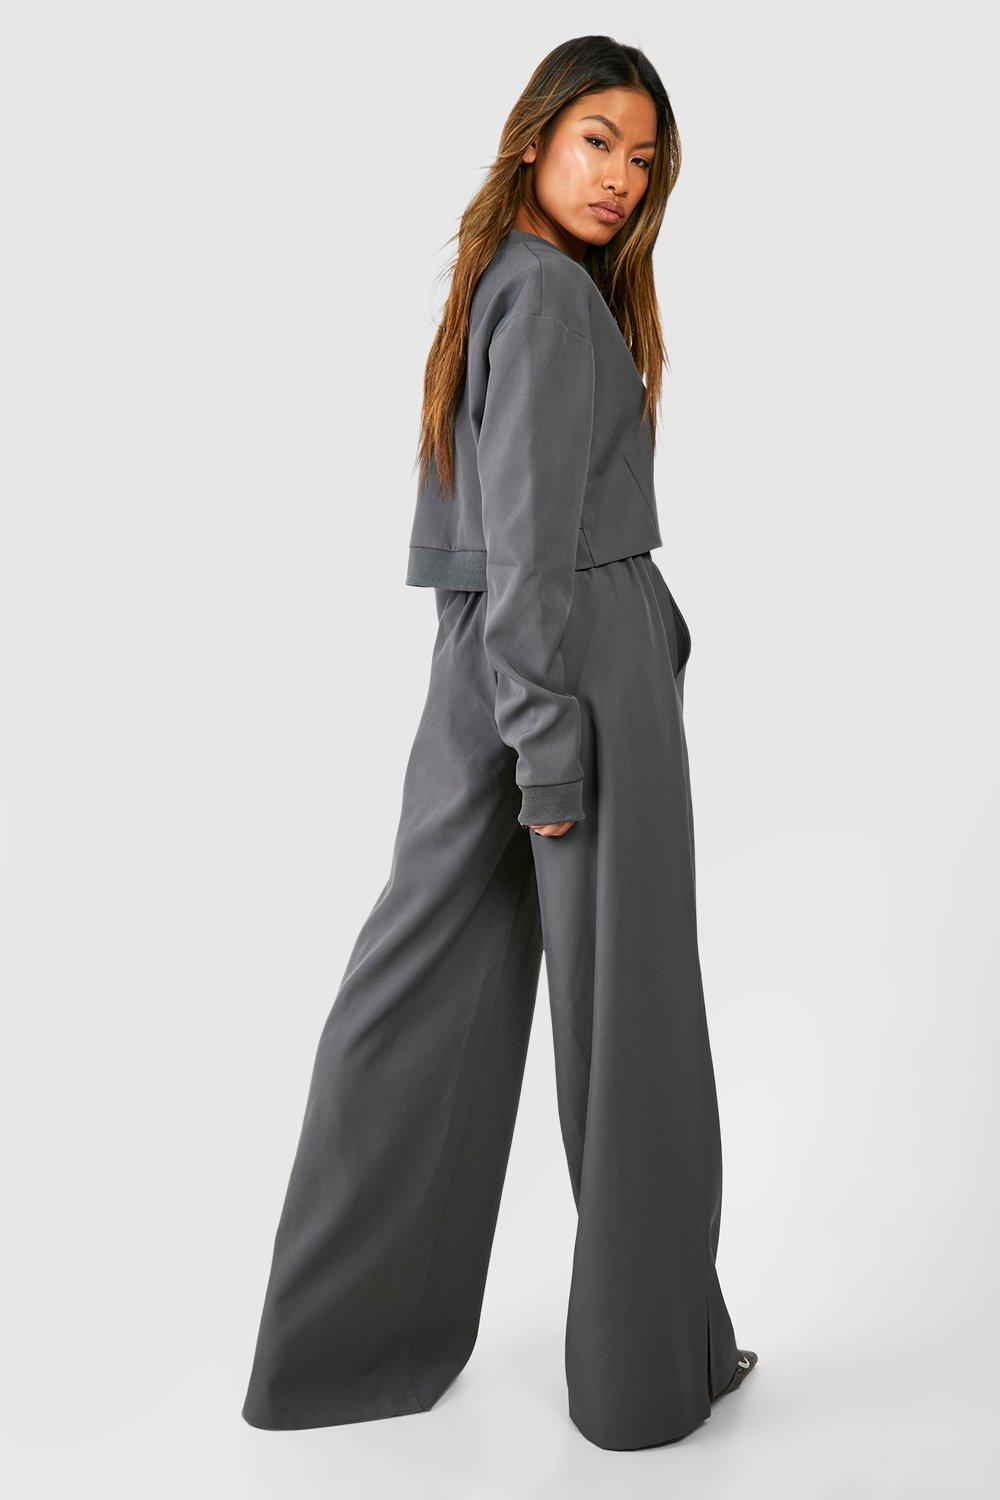 Women's Charcoal Tailored Trousers